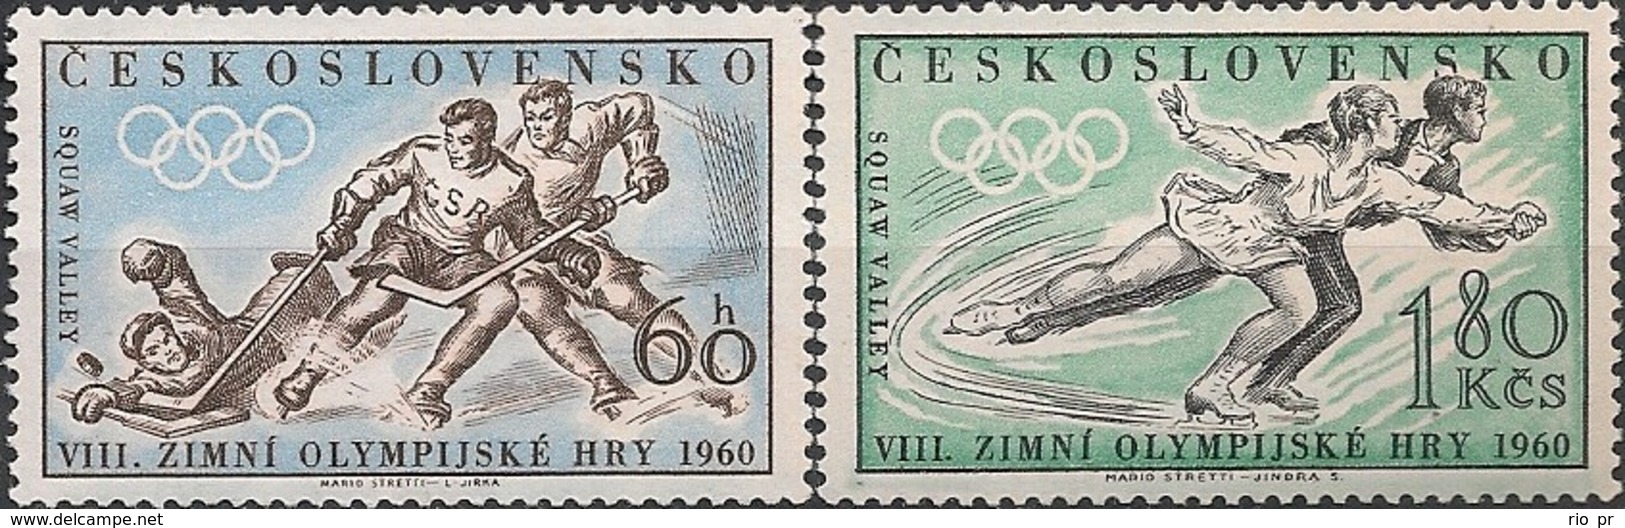 CZECHOSLOVAKIA - COMPLETE SET SQUAW VALLEY'60 WINTER OLYMPIC GAMES 1960 - MNH - Invierno 1960: Squaw Valley